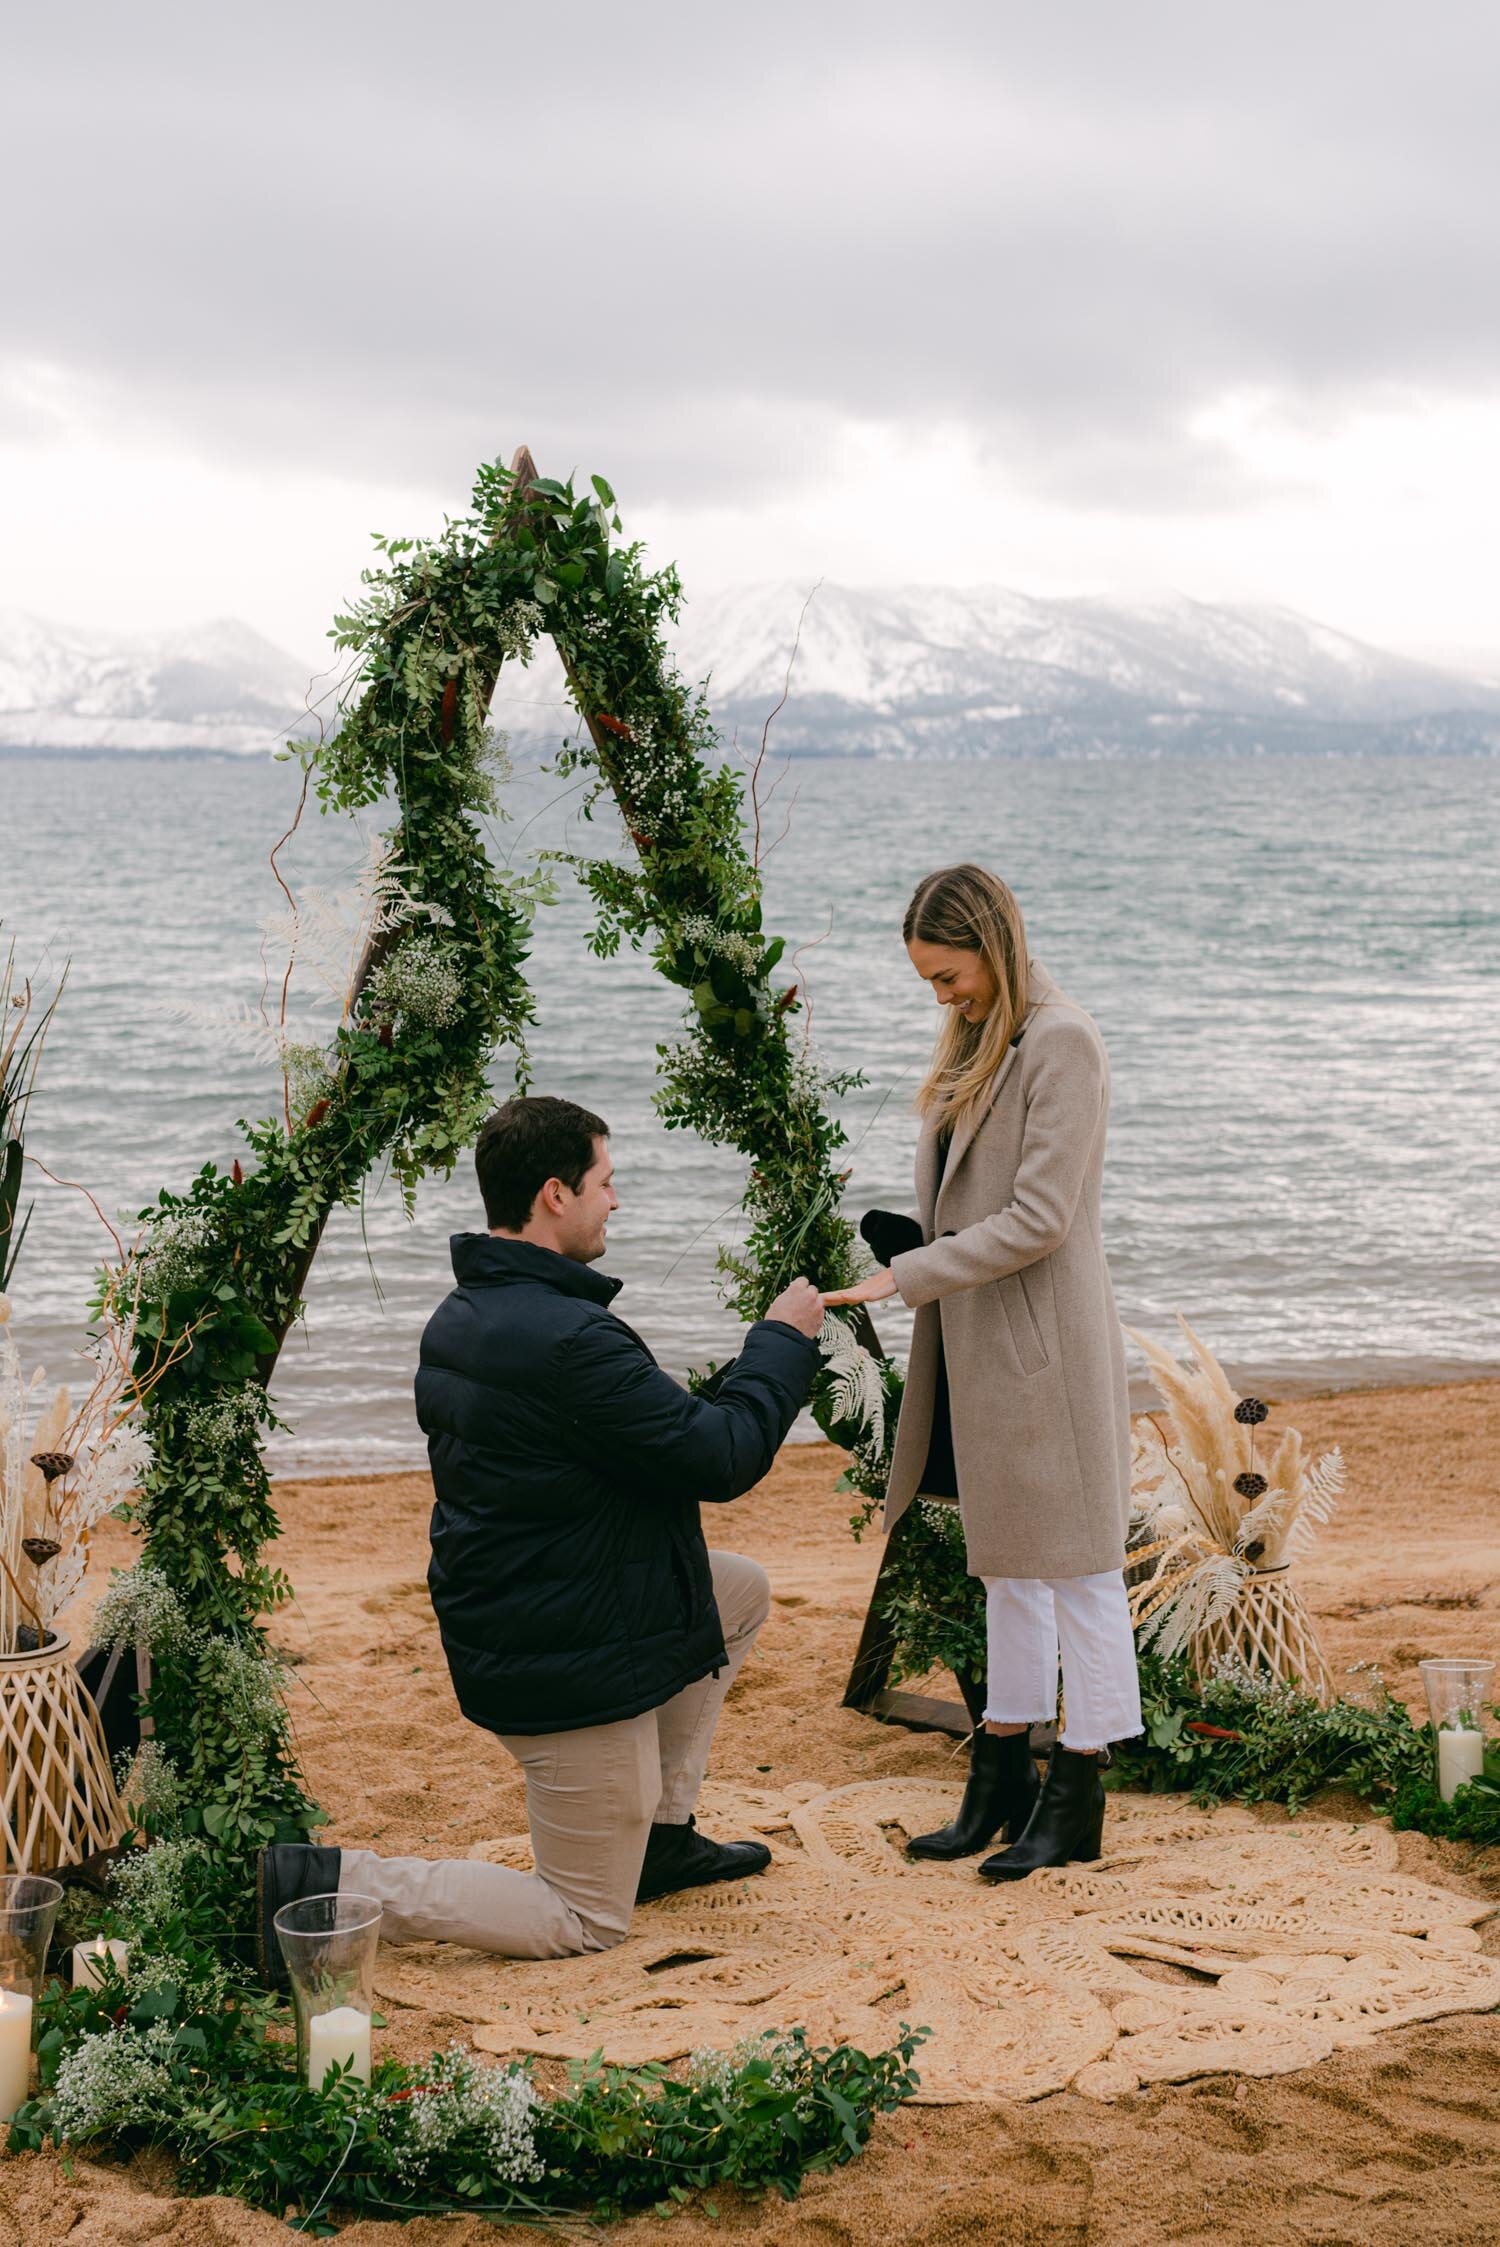 Lake Tahoe Proposal at Edgewood, photo of girl getting proposed to